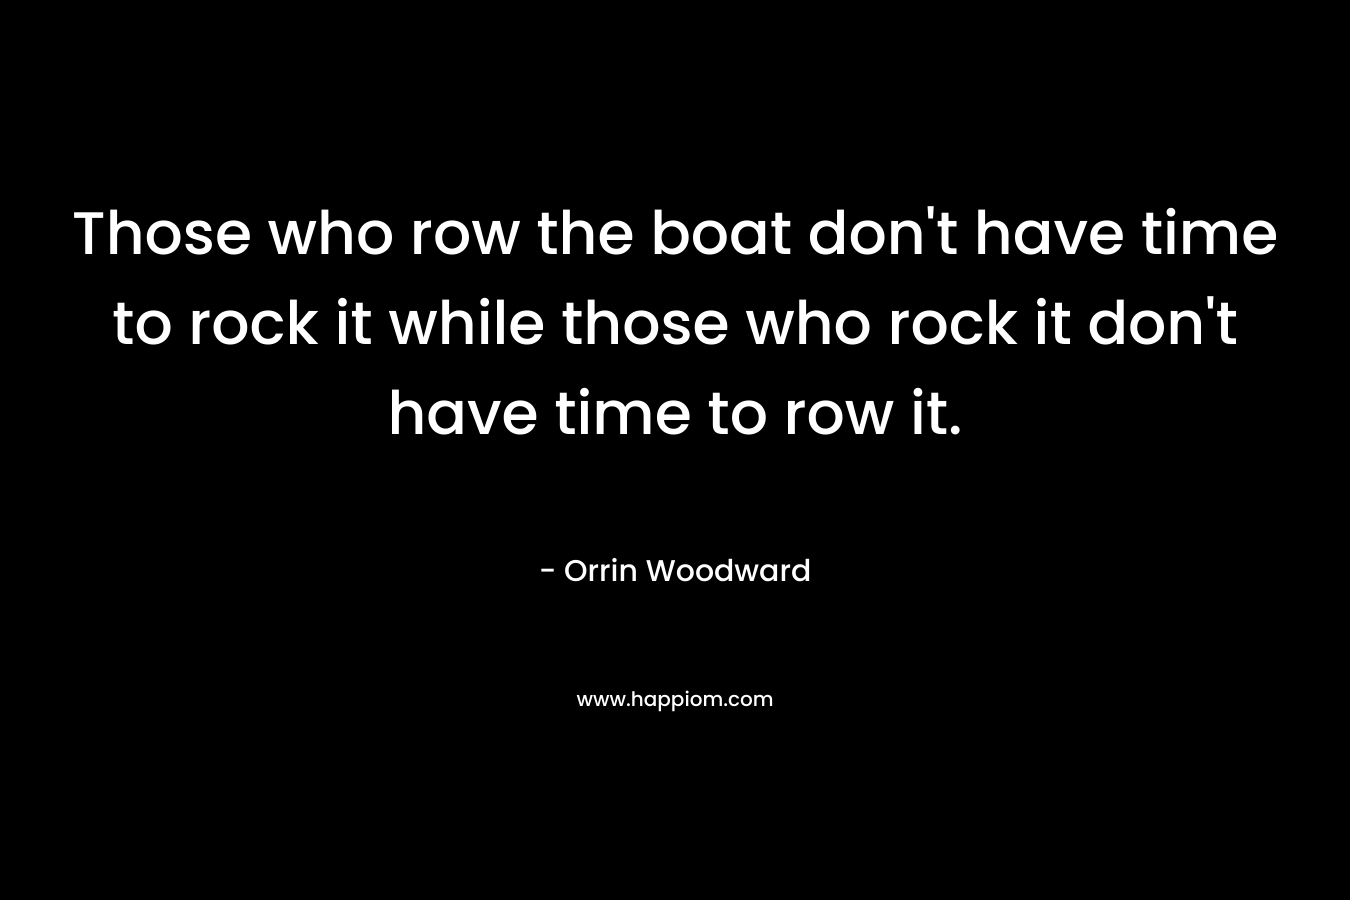 Those who row the boat don't have time to rock it while those who rock it don't have time to row it.